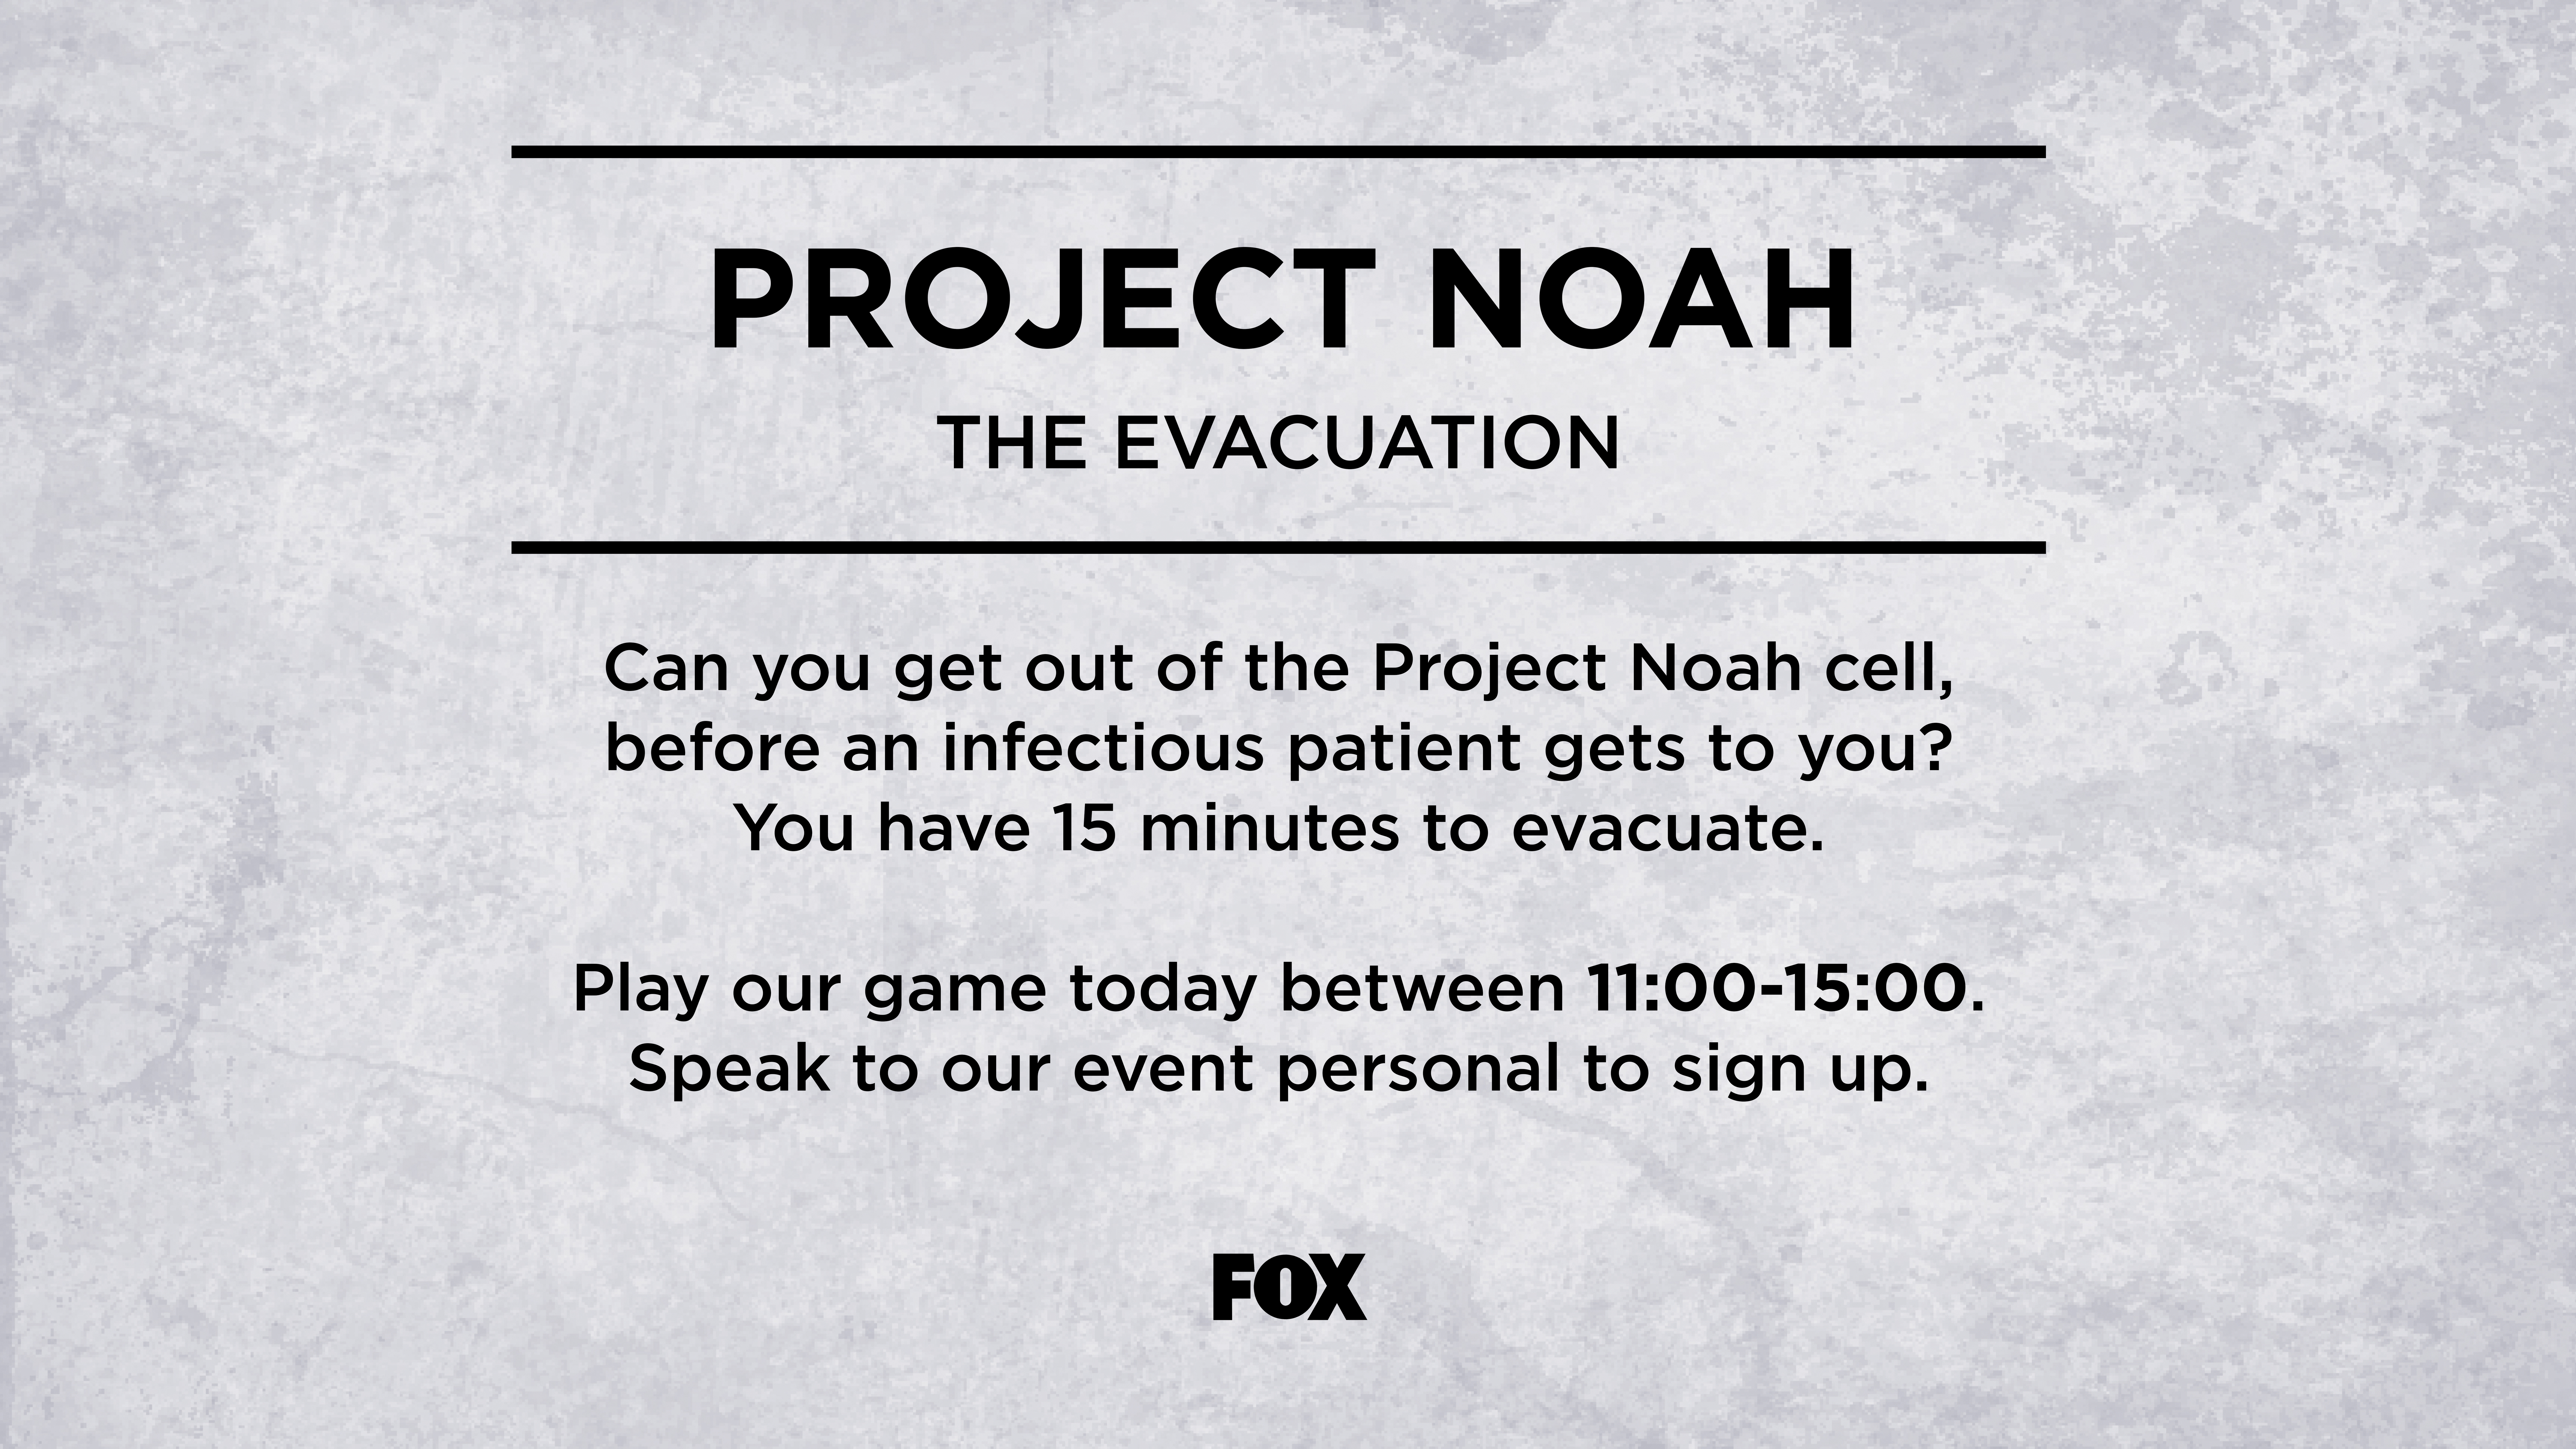 Project Noah – the game info on TV